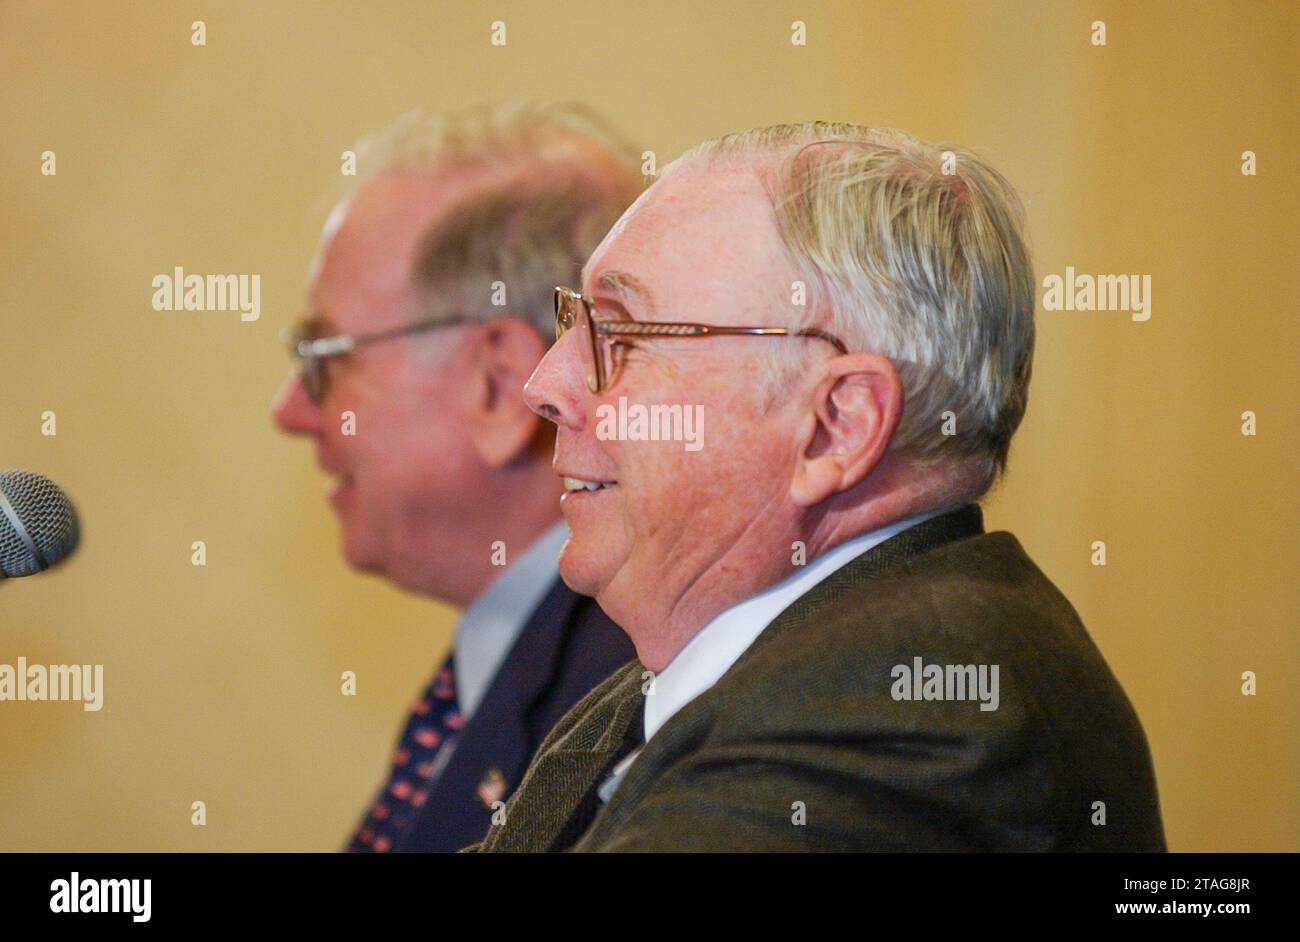 Omaha, NE, USA, 05.05.2002; Warren Buffett, ranked the 2nd richest man in the world, and his companion Charlie Munger during their Annual Press onfoerence following the meeting for the share holders. DIGITAL Photo: Orjan F. Ellingvag / Corbis Sygma Stock Photo